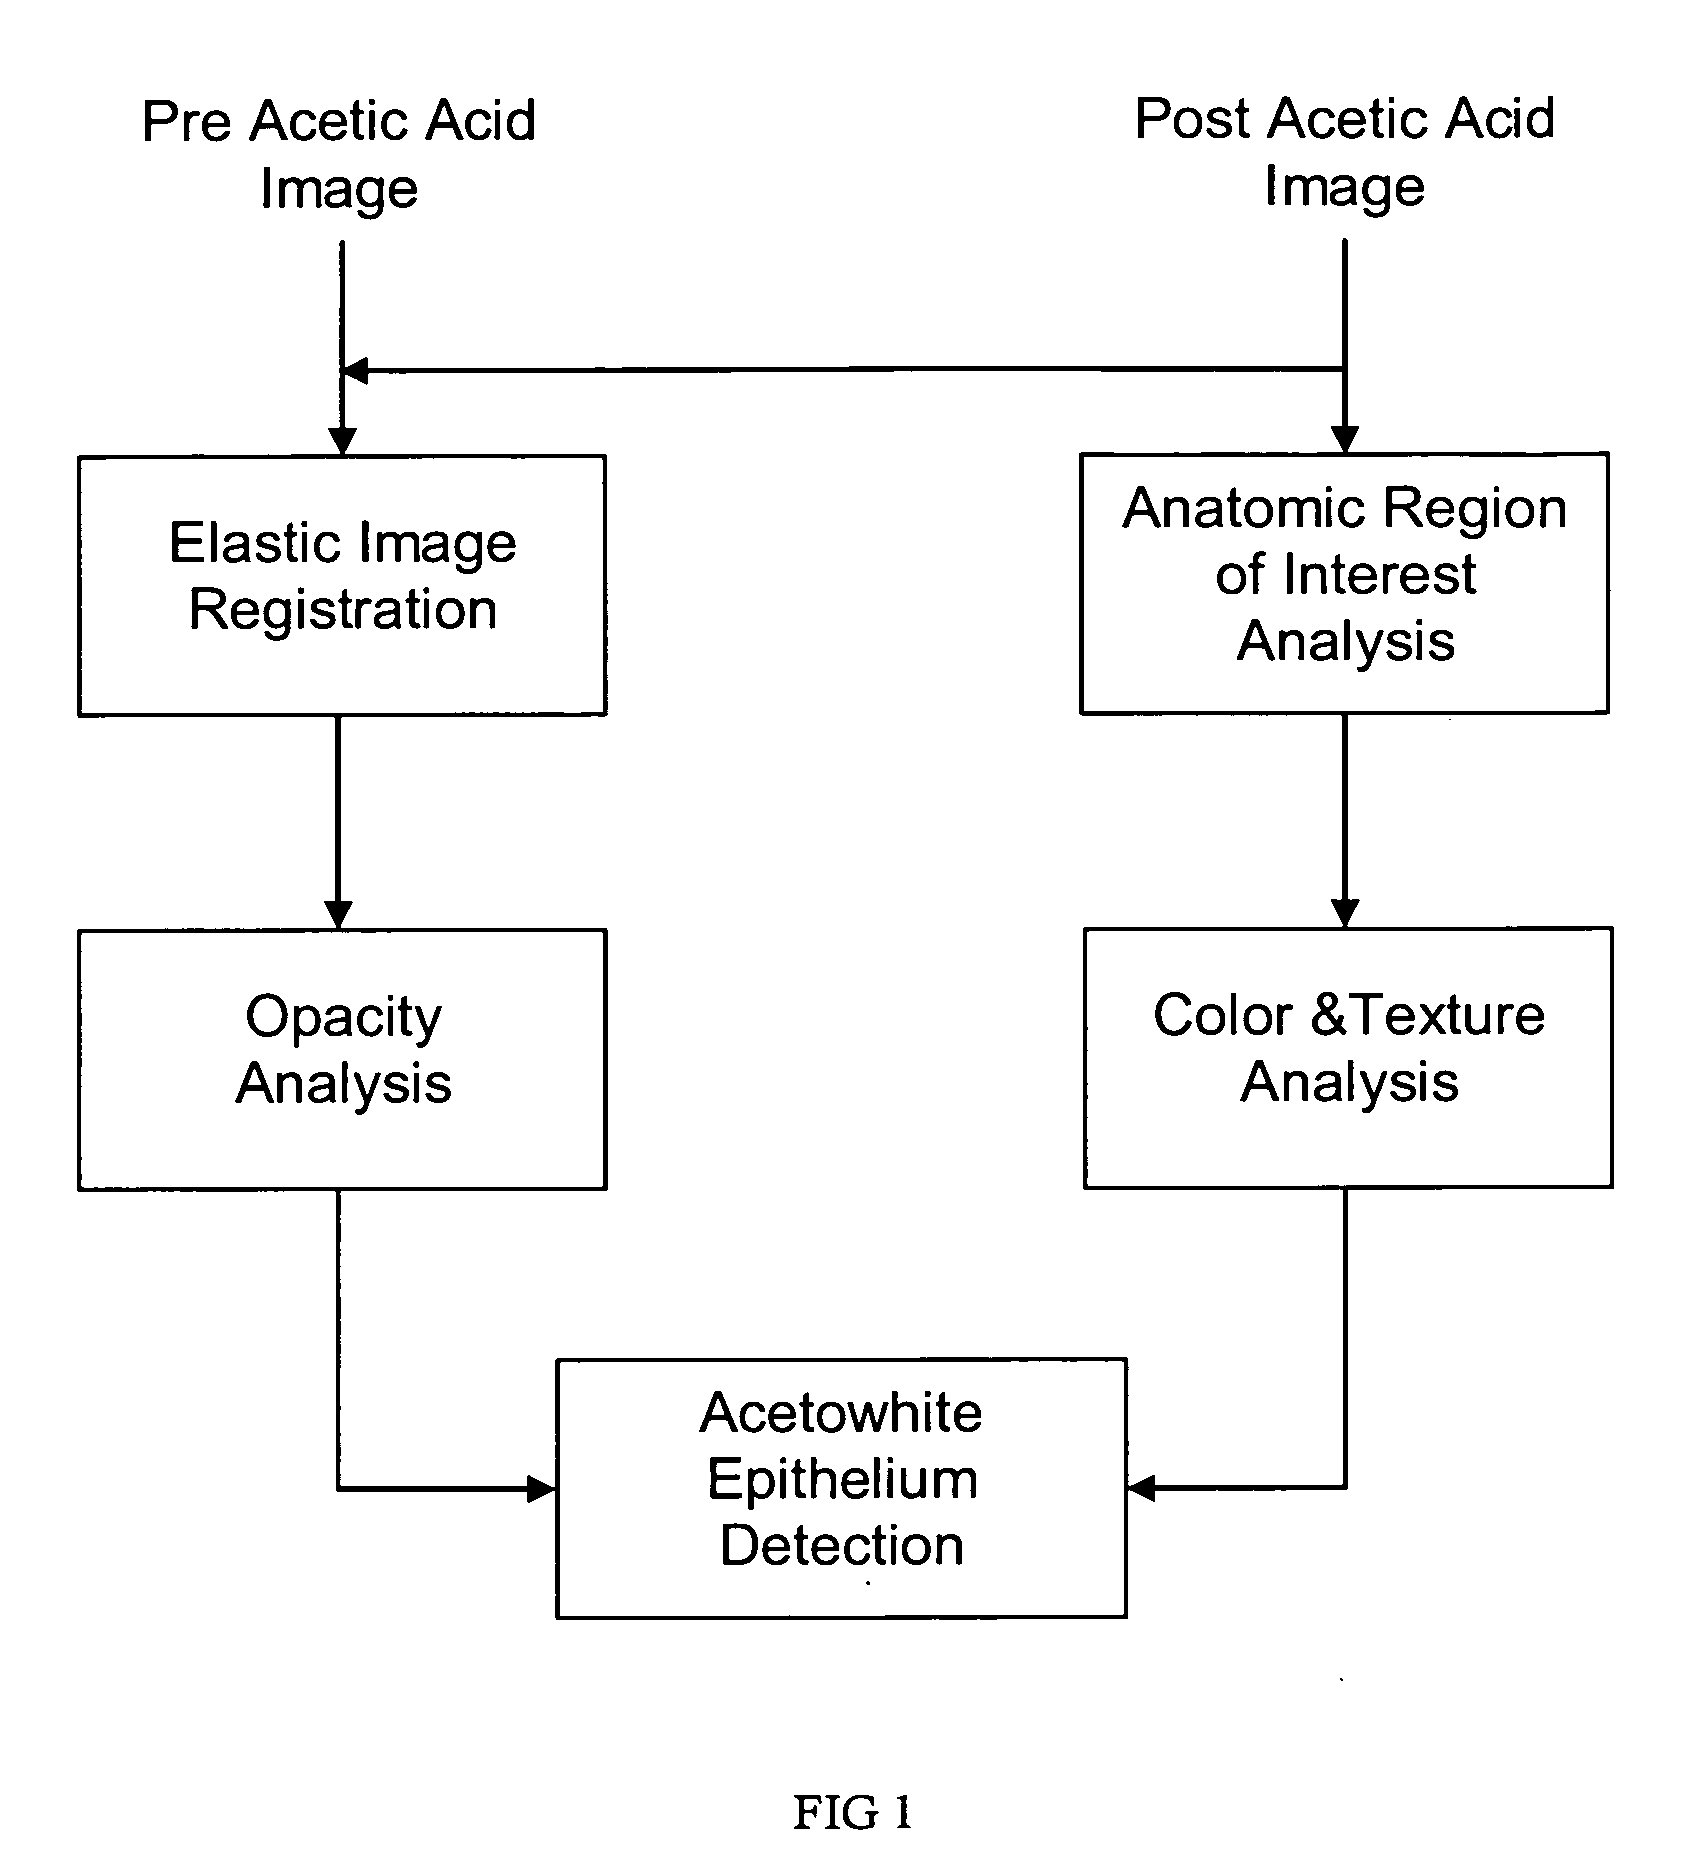 Computerized image analysis for acetic acid induced Cervical Intraepithelial Neoplasia